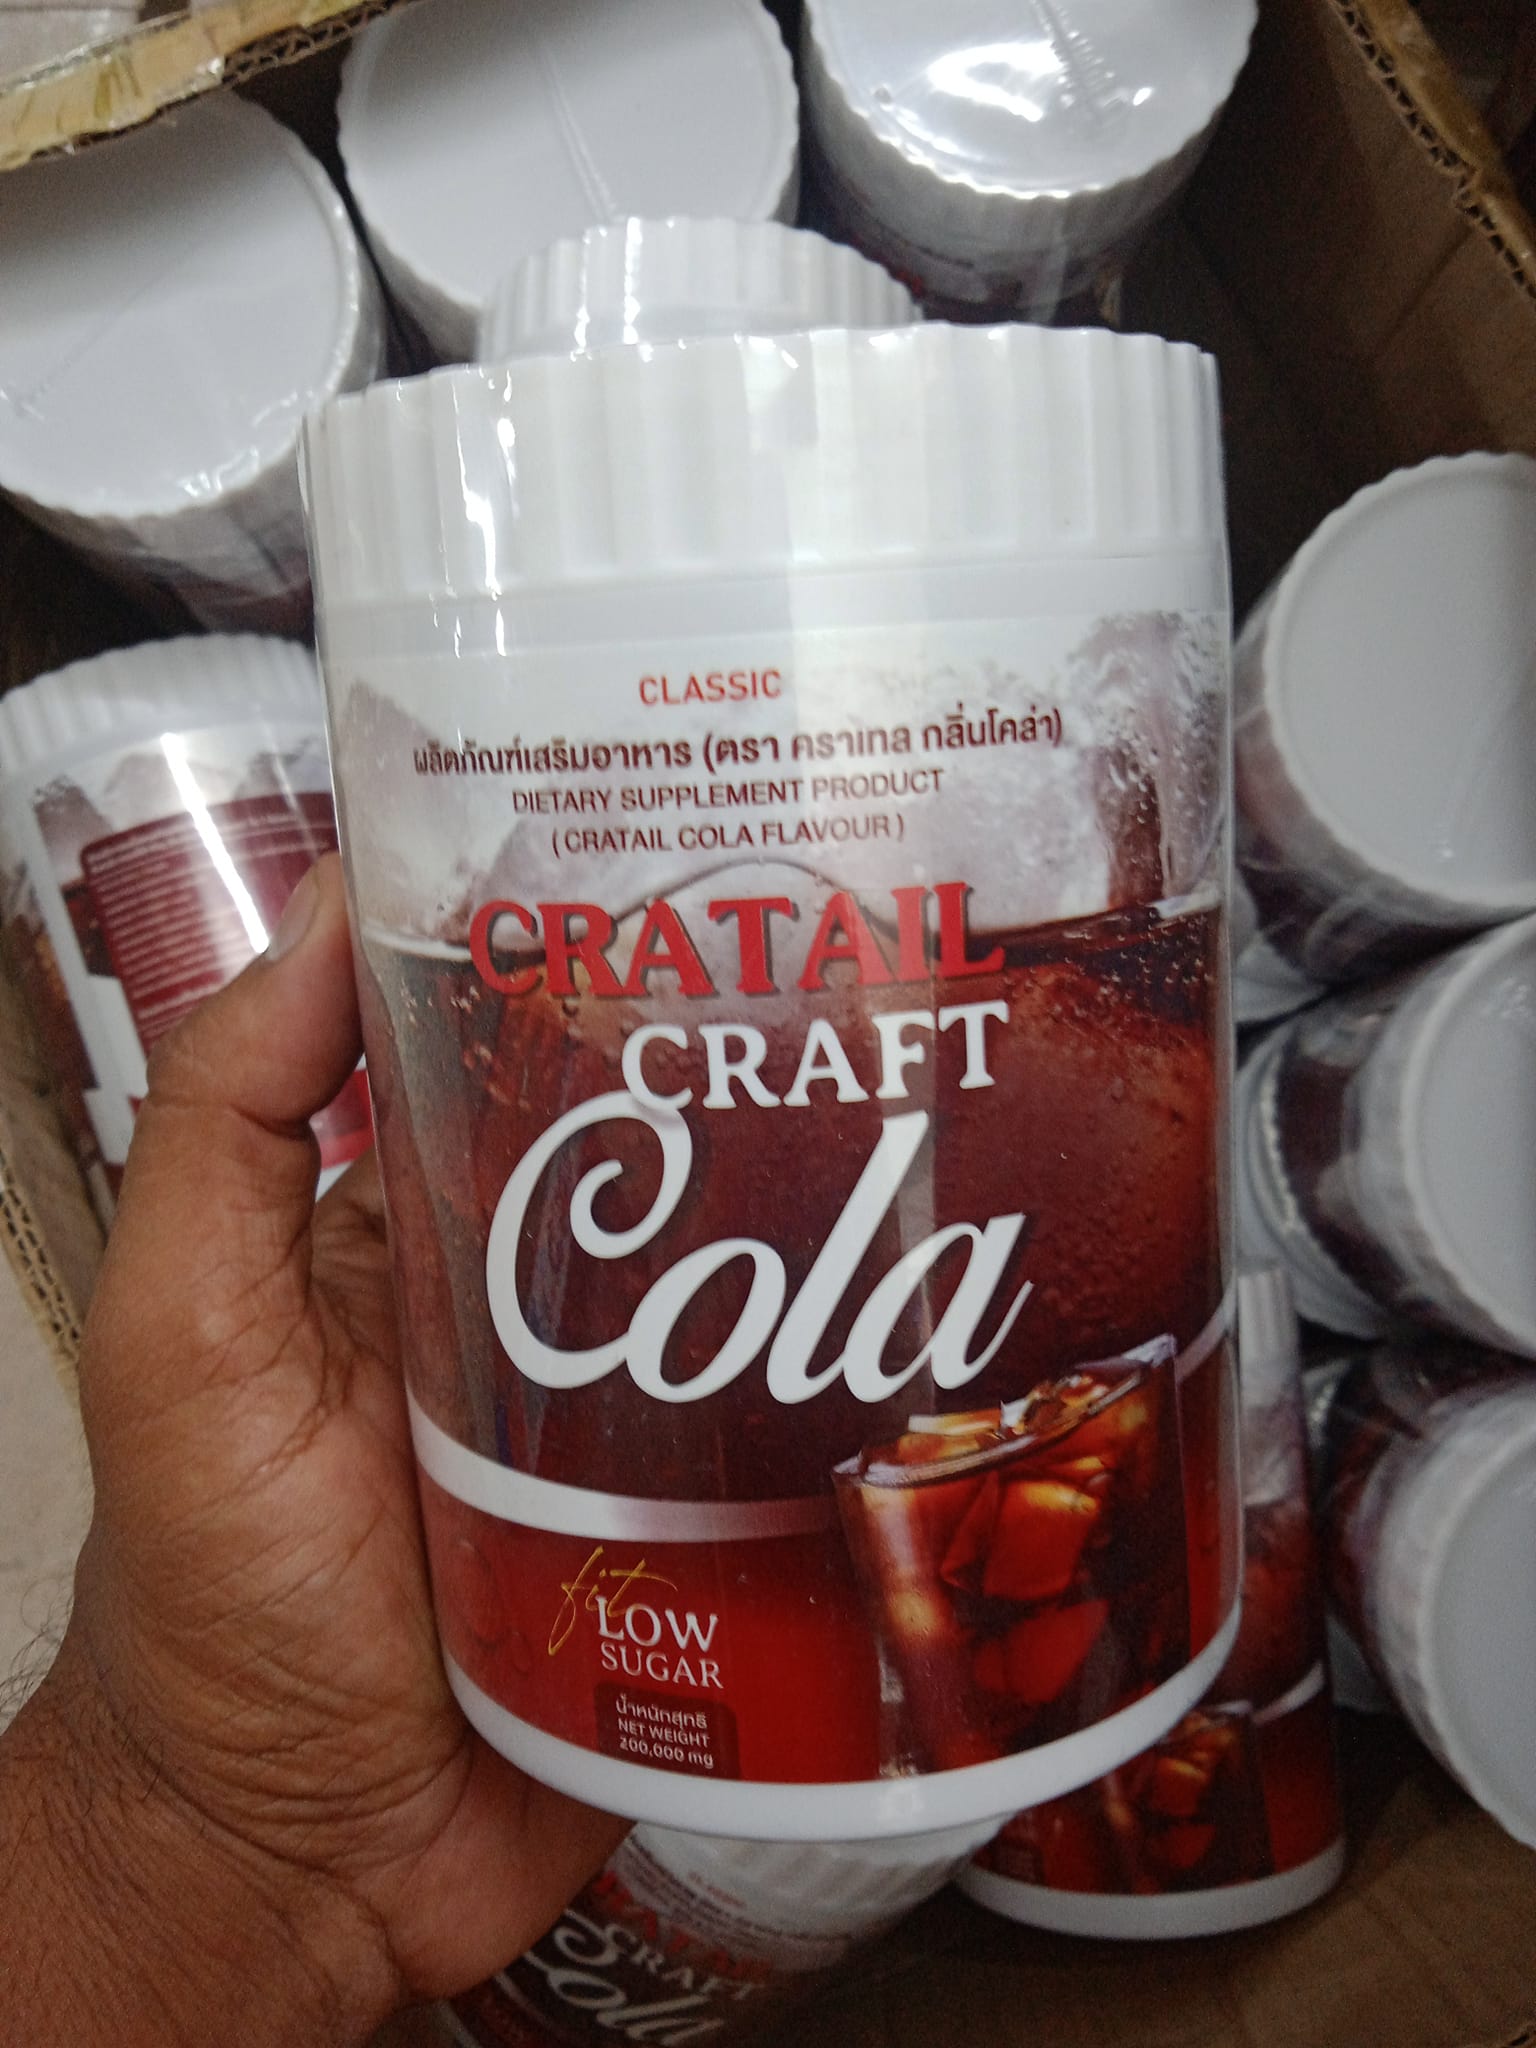 Craft Cola Cocktail 200g, Product Of Thailand